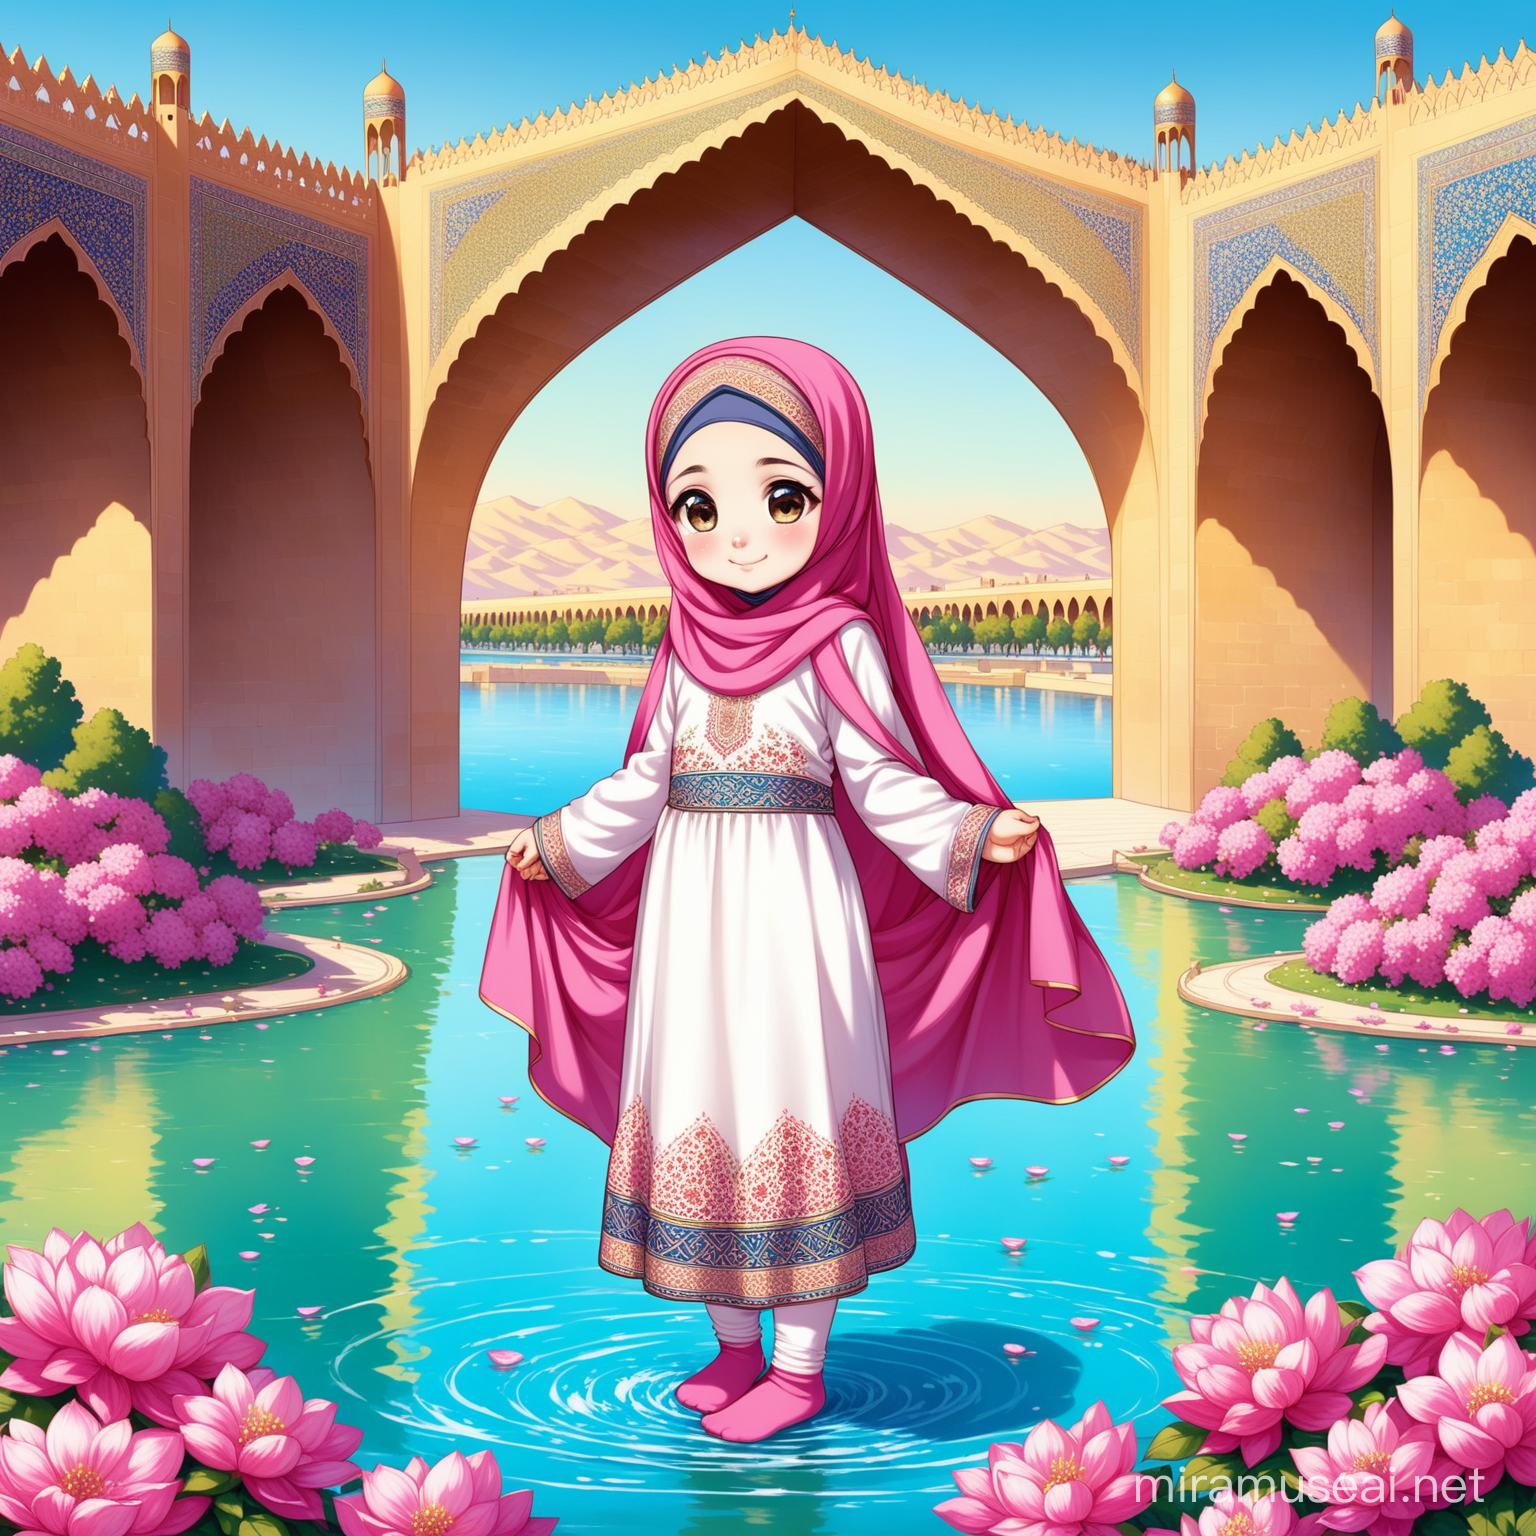 Persian Little Girl Admiring Isfahans Bridges with Iranian Flag and Pink Flowers